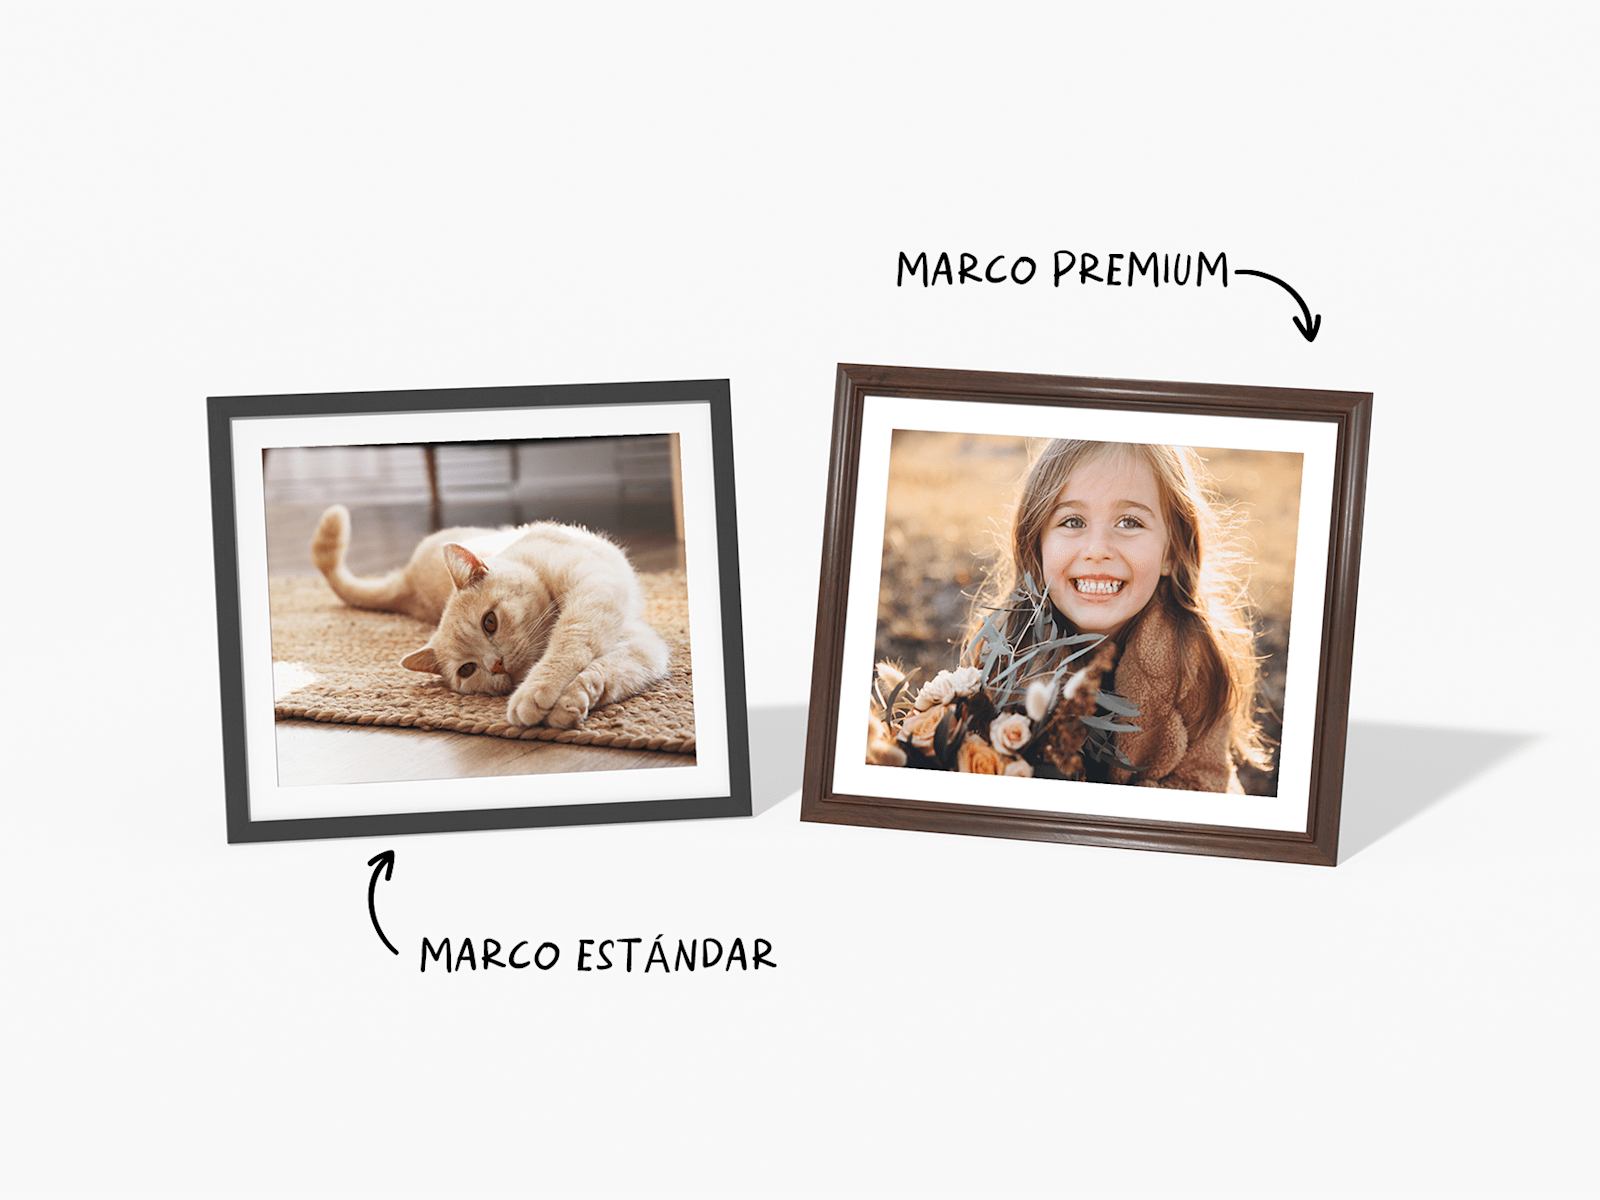 Two photo prints show the difference between standard and premium frames.